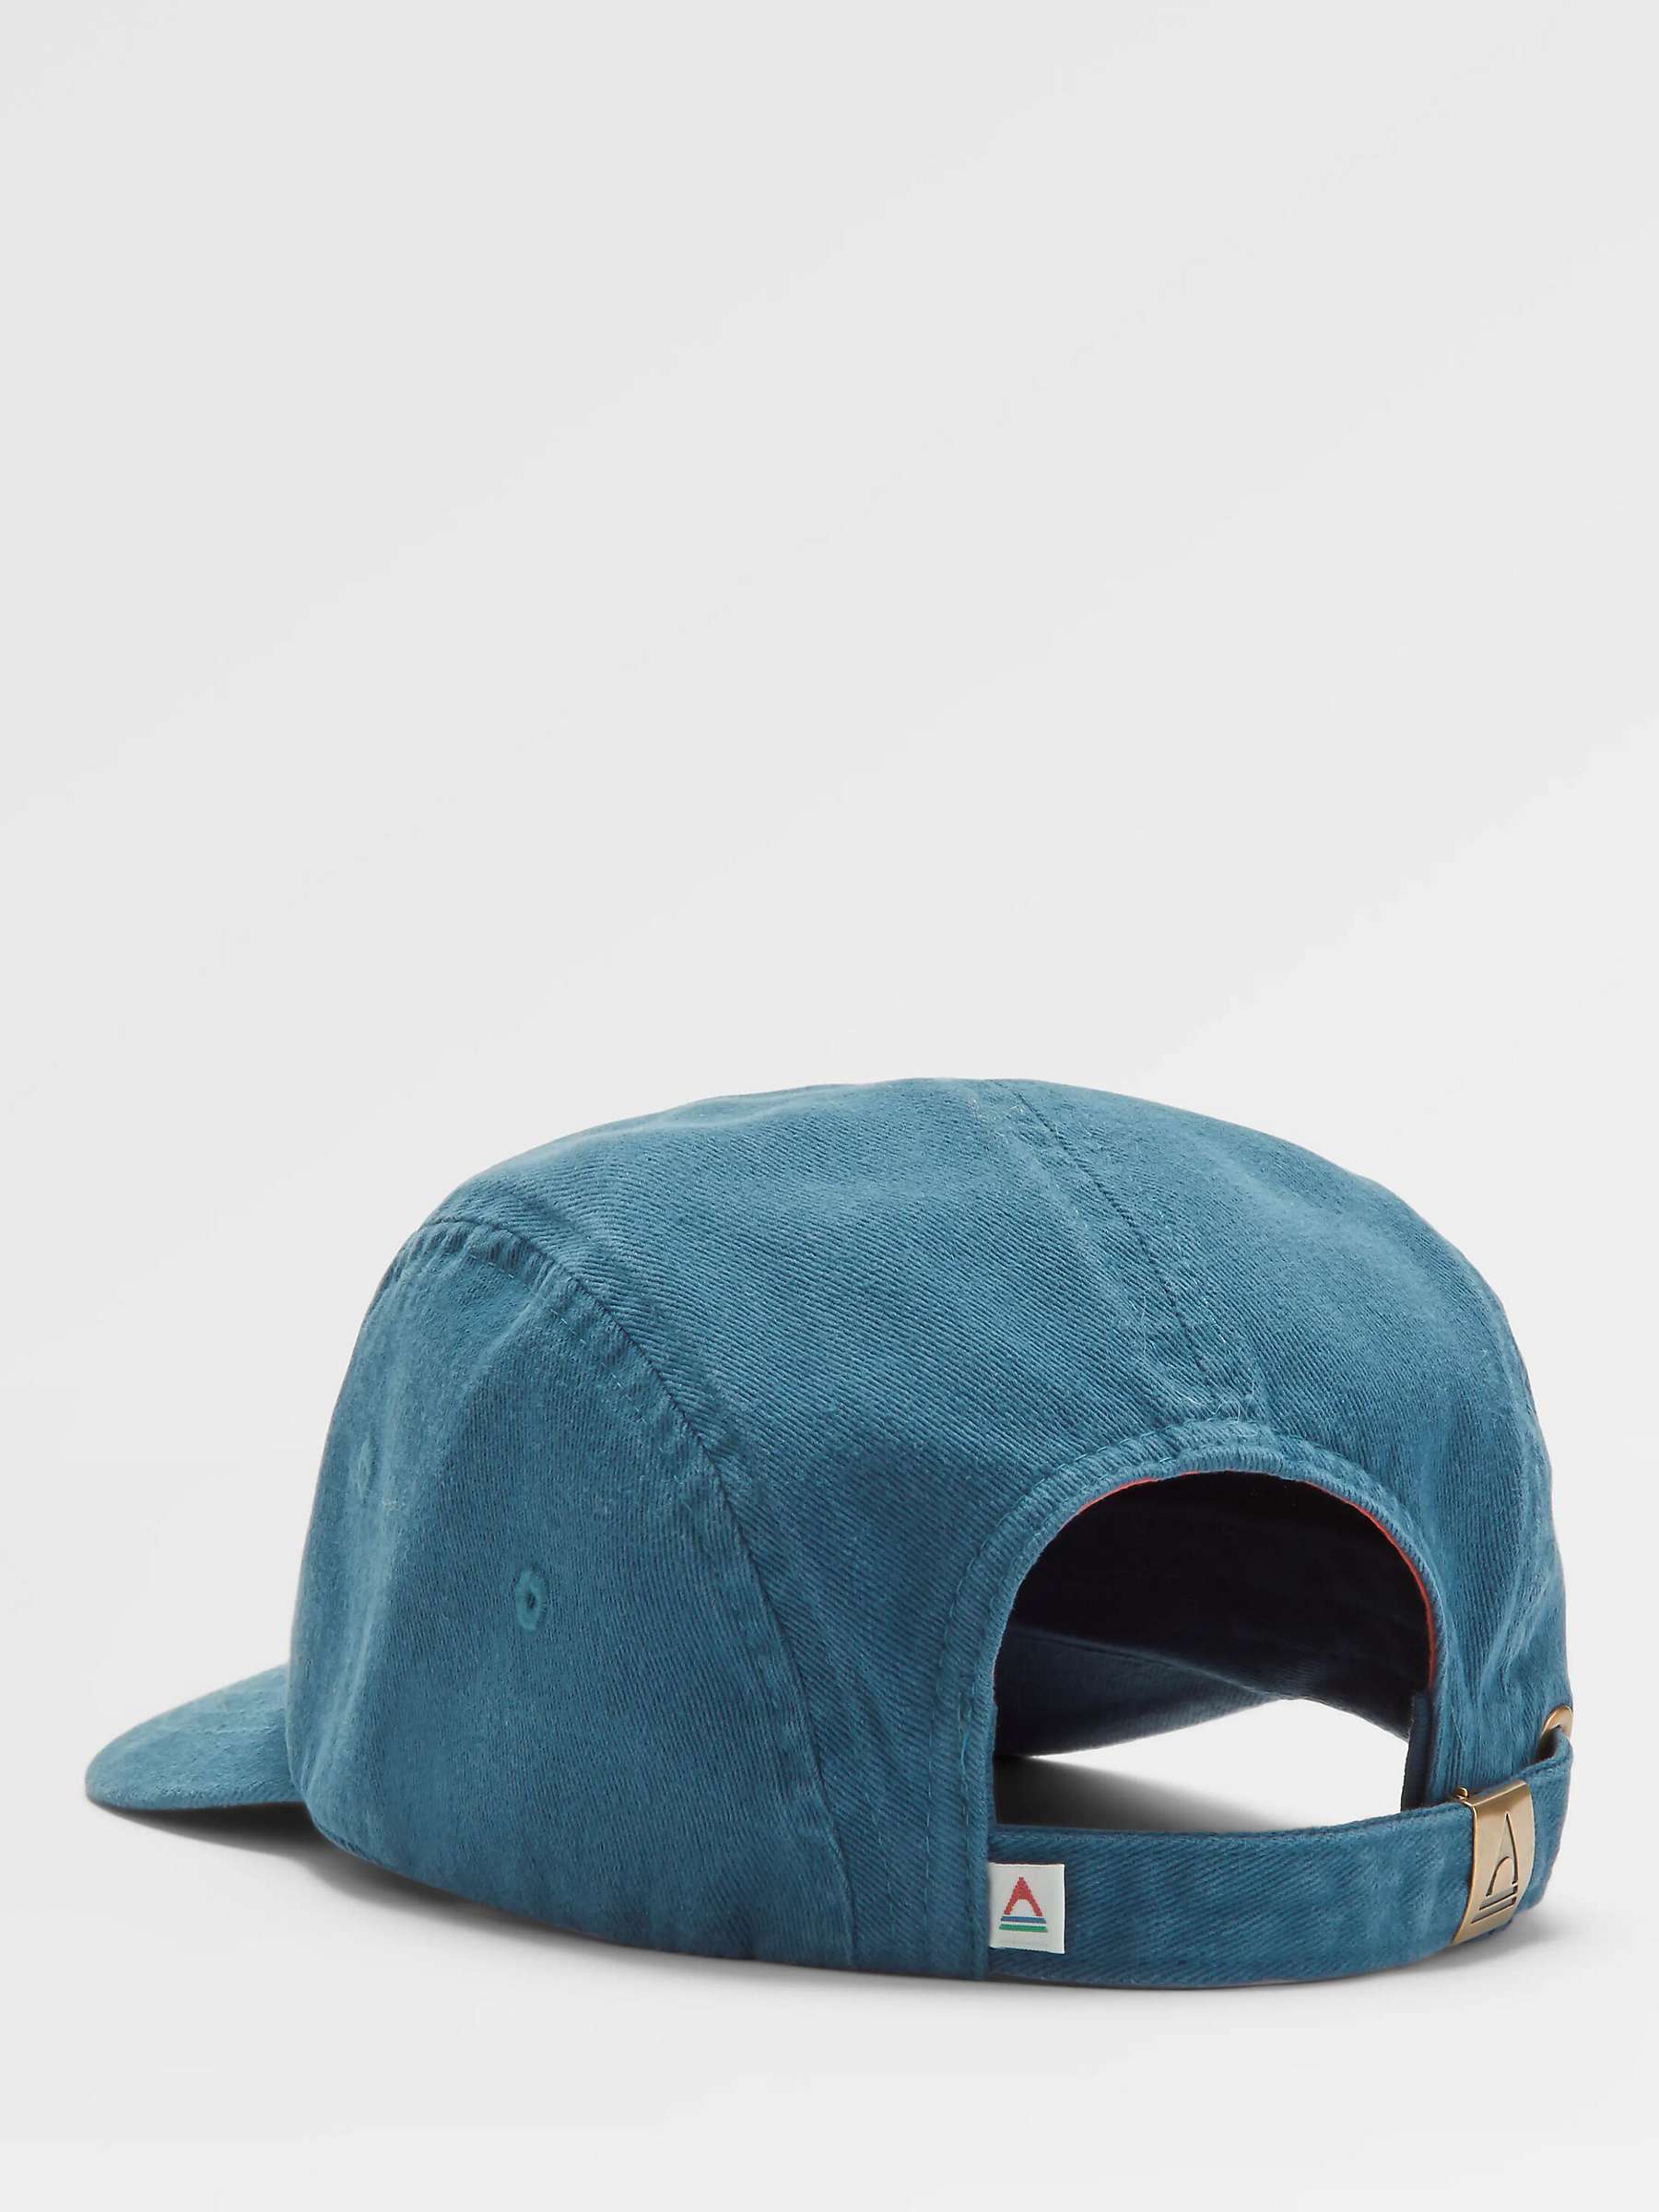 Buy Passenger Fixie Recycled Cotton Twill Cap, Tidal Blue Online at johnlewis.com